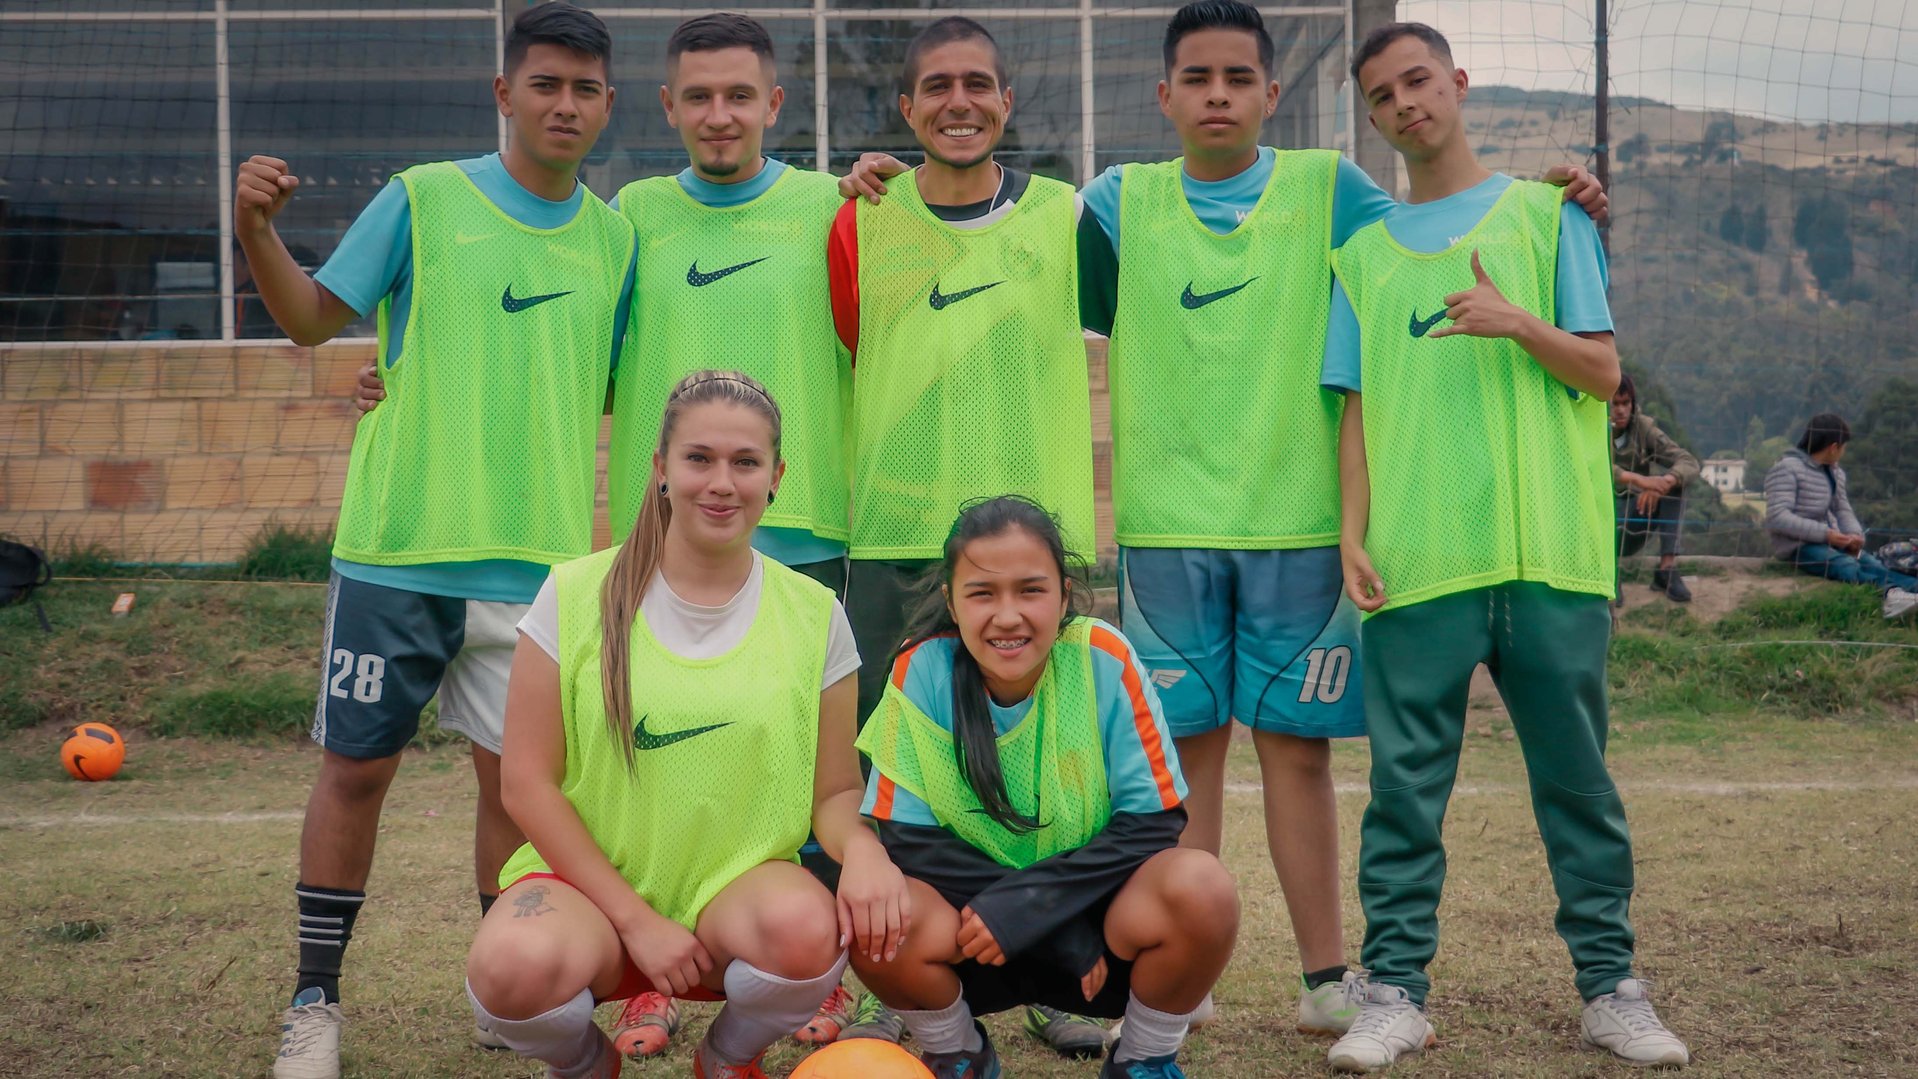 War Child Colombia Play it For Life participants standing in a group on a football field